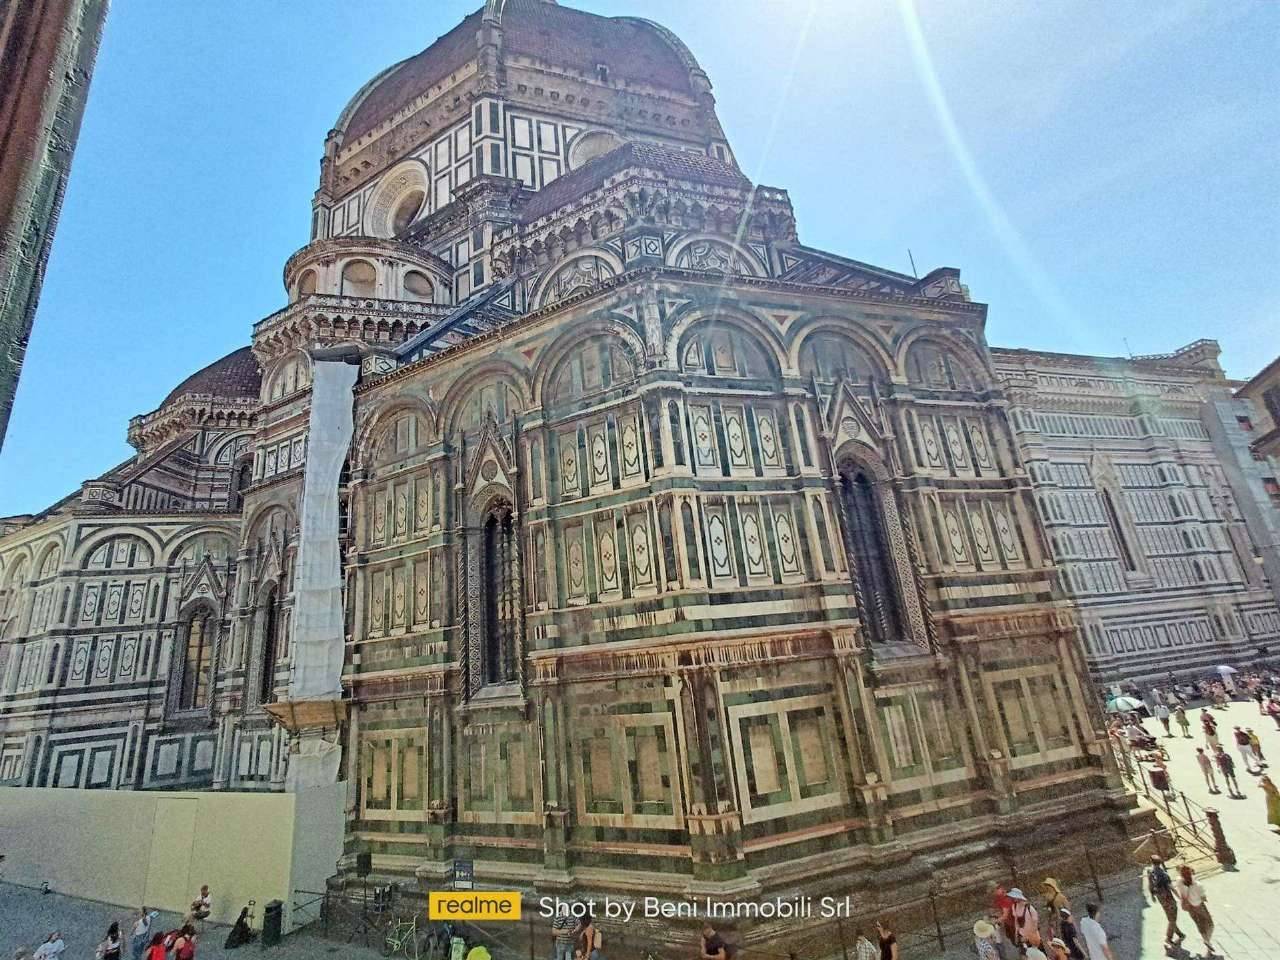 Ref: AF000RODU - REF:AFU000RODU, FLORENCE, DUOMO, Apartment for office use 370sqm. Excellent condition. Eu. 7,500 FREE In the heart of the historic 